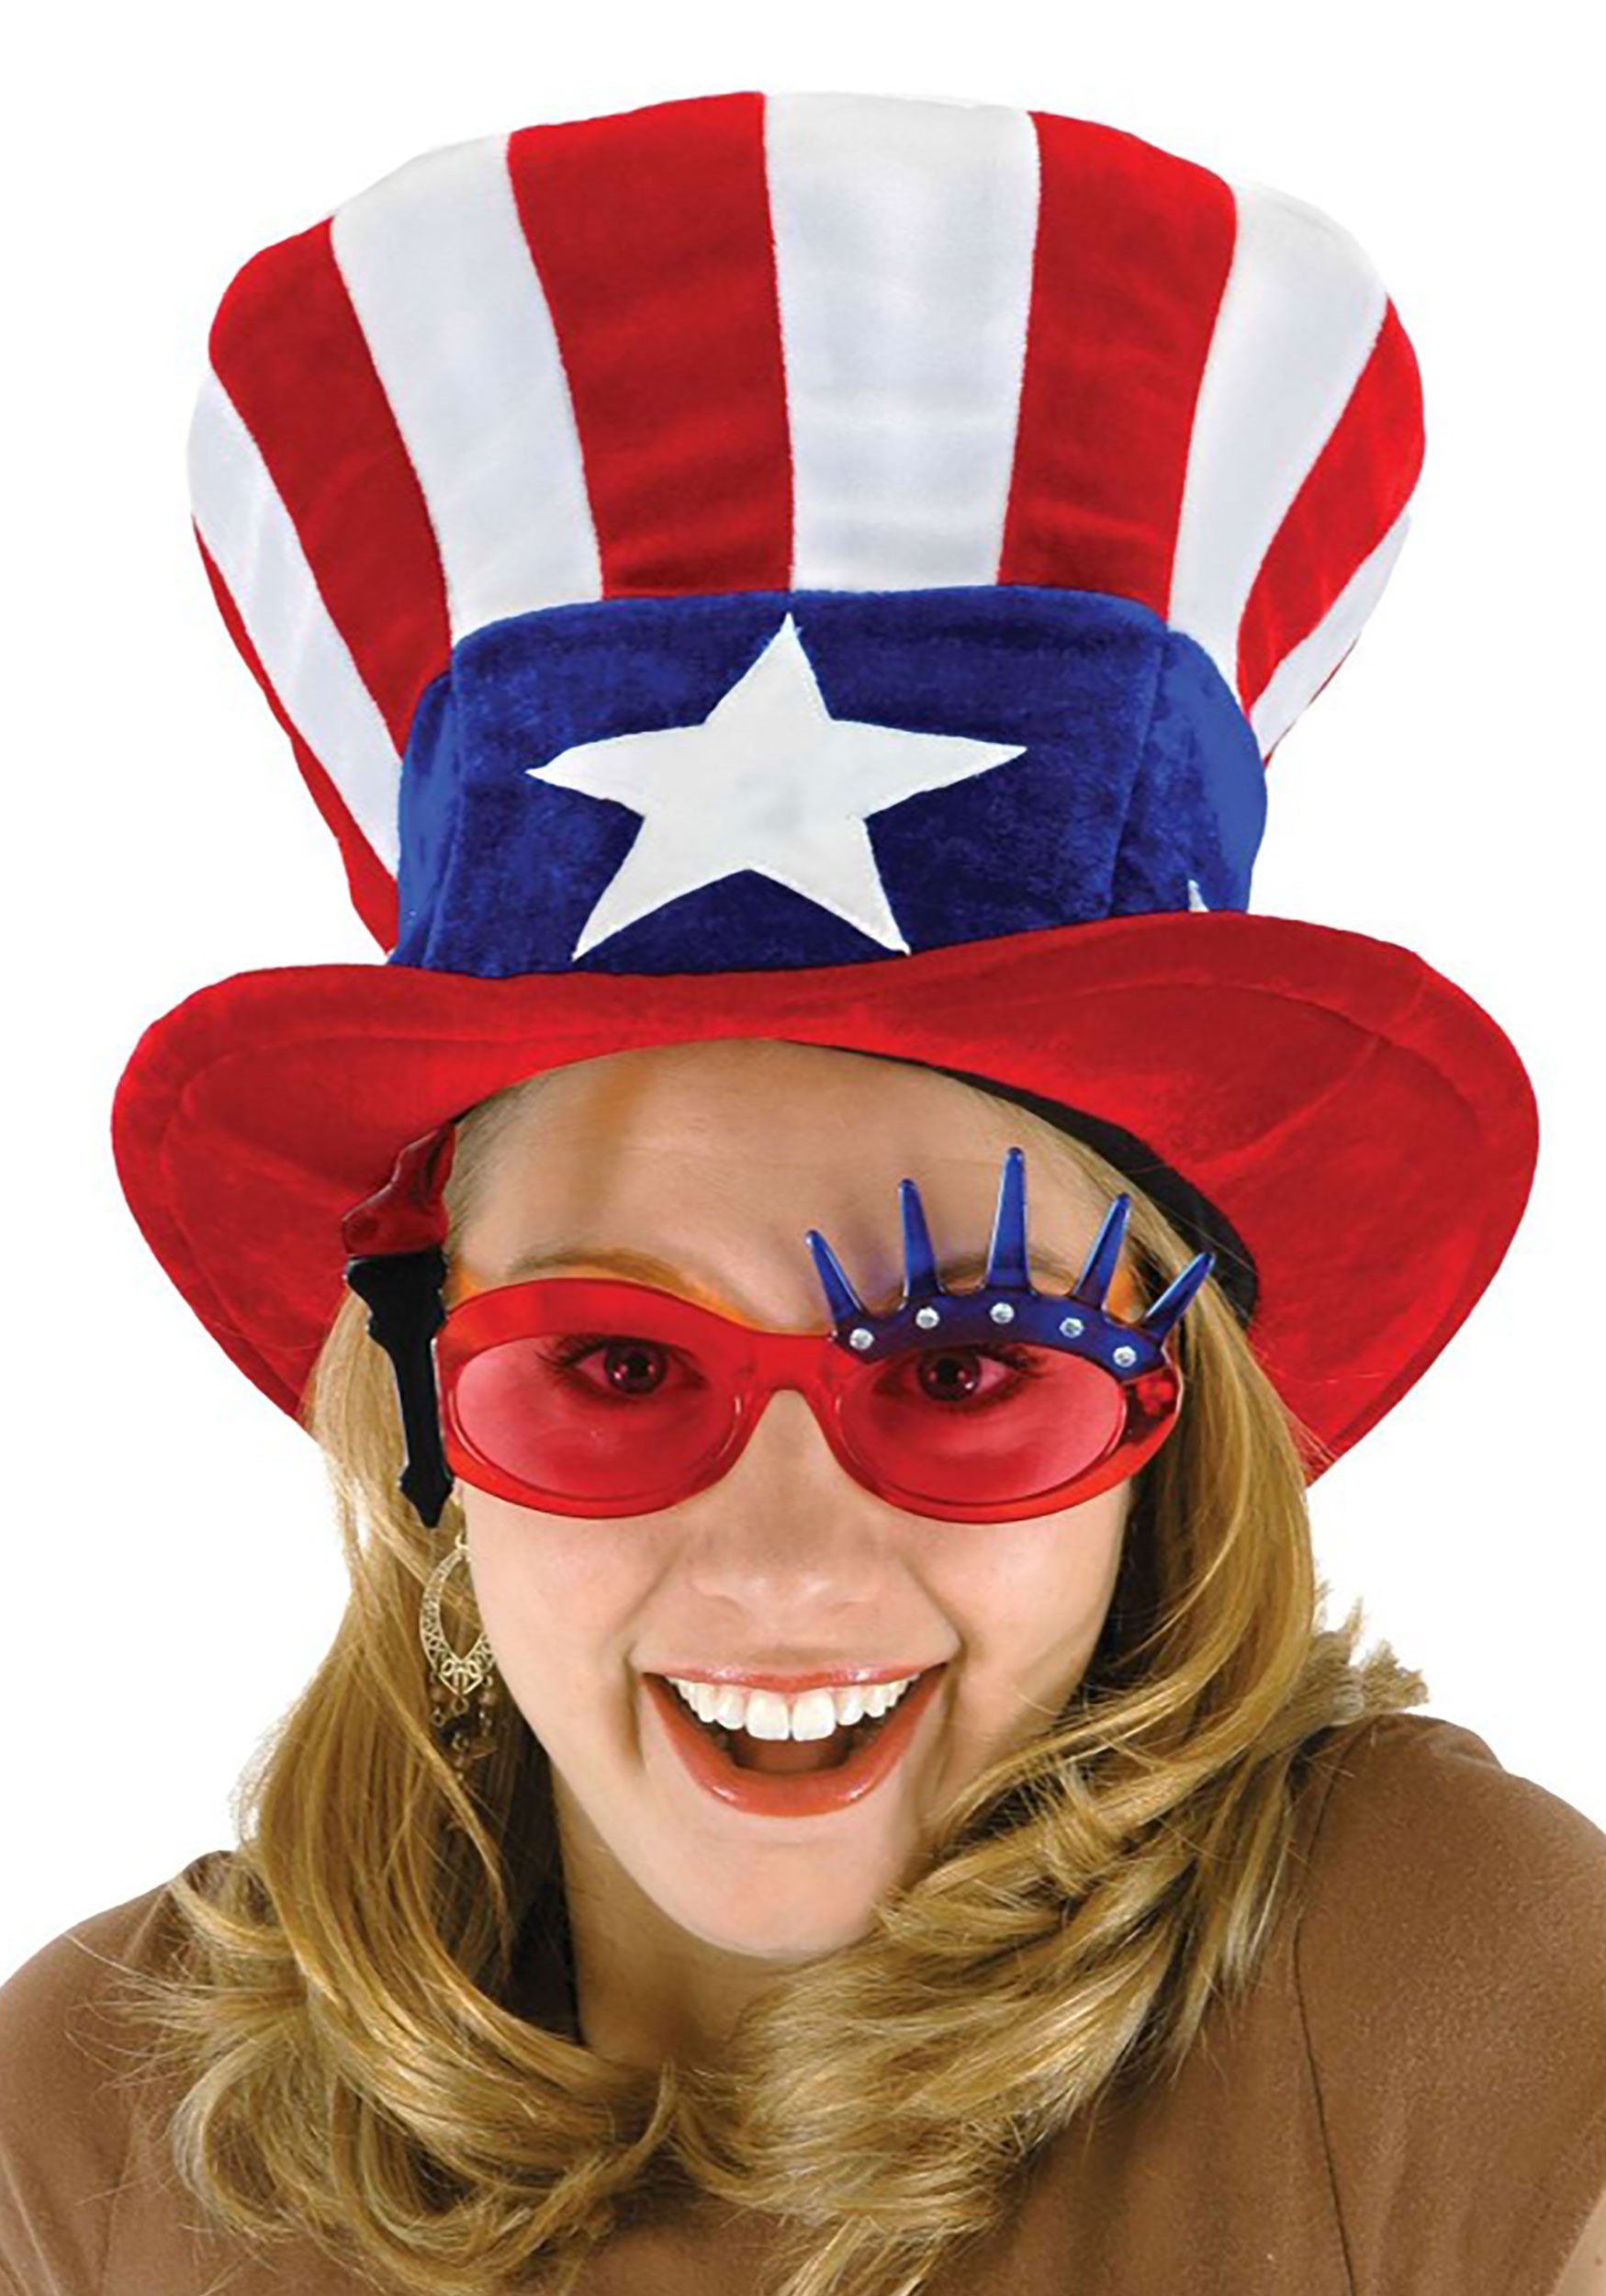 Photos - Fancy Dress FUN Costumes Uncle Sam Adult Top Hat Blue/Red/White EL290850